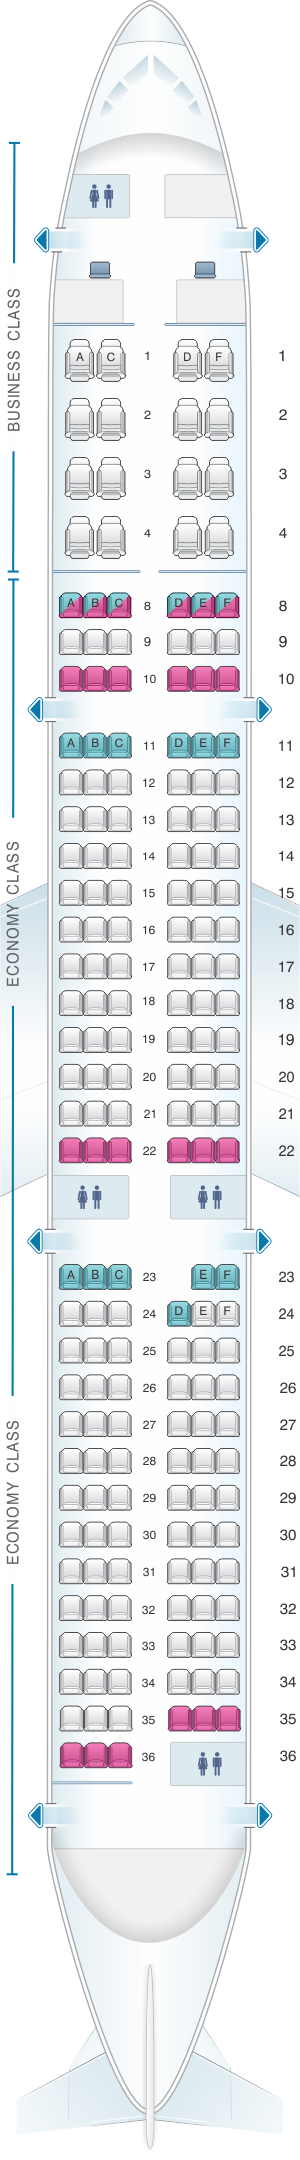 Seat map for Aeroflot Russian Airlines Airbus A321 Config.3